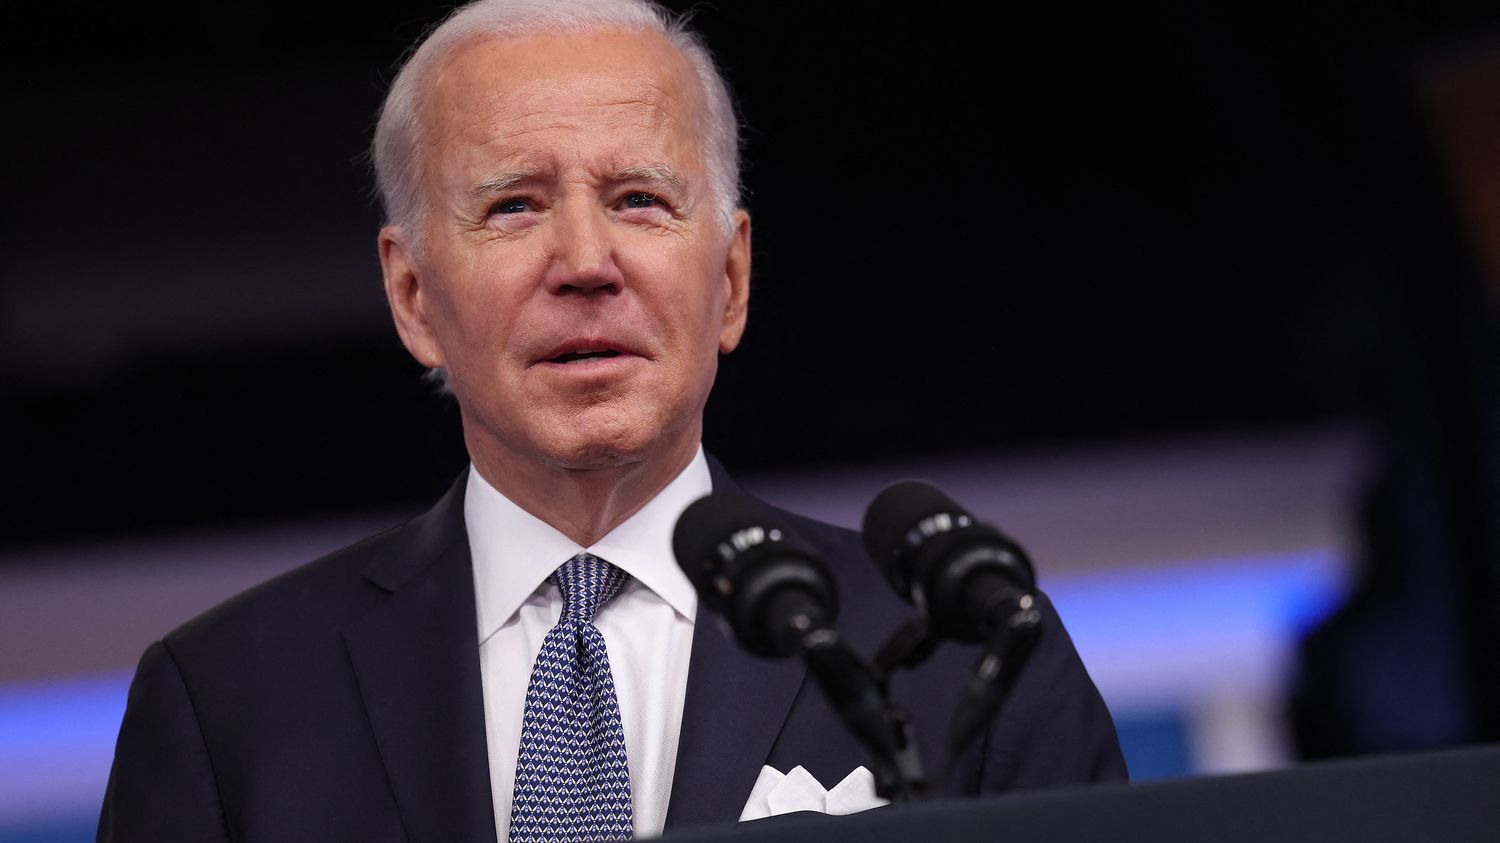 United States: new confidential documents found in a private residence of Joe Biden, a special prosecutor appointed to investigate
